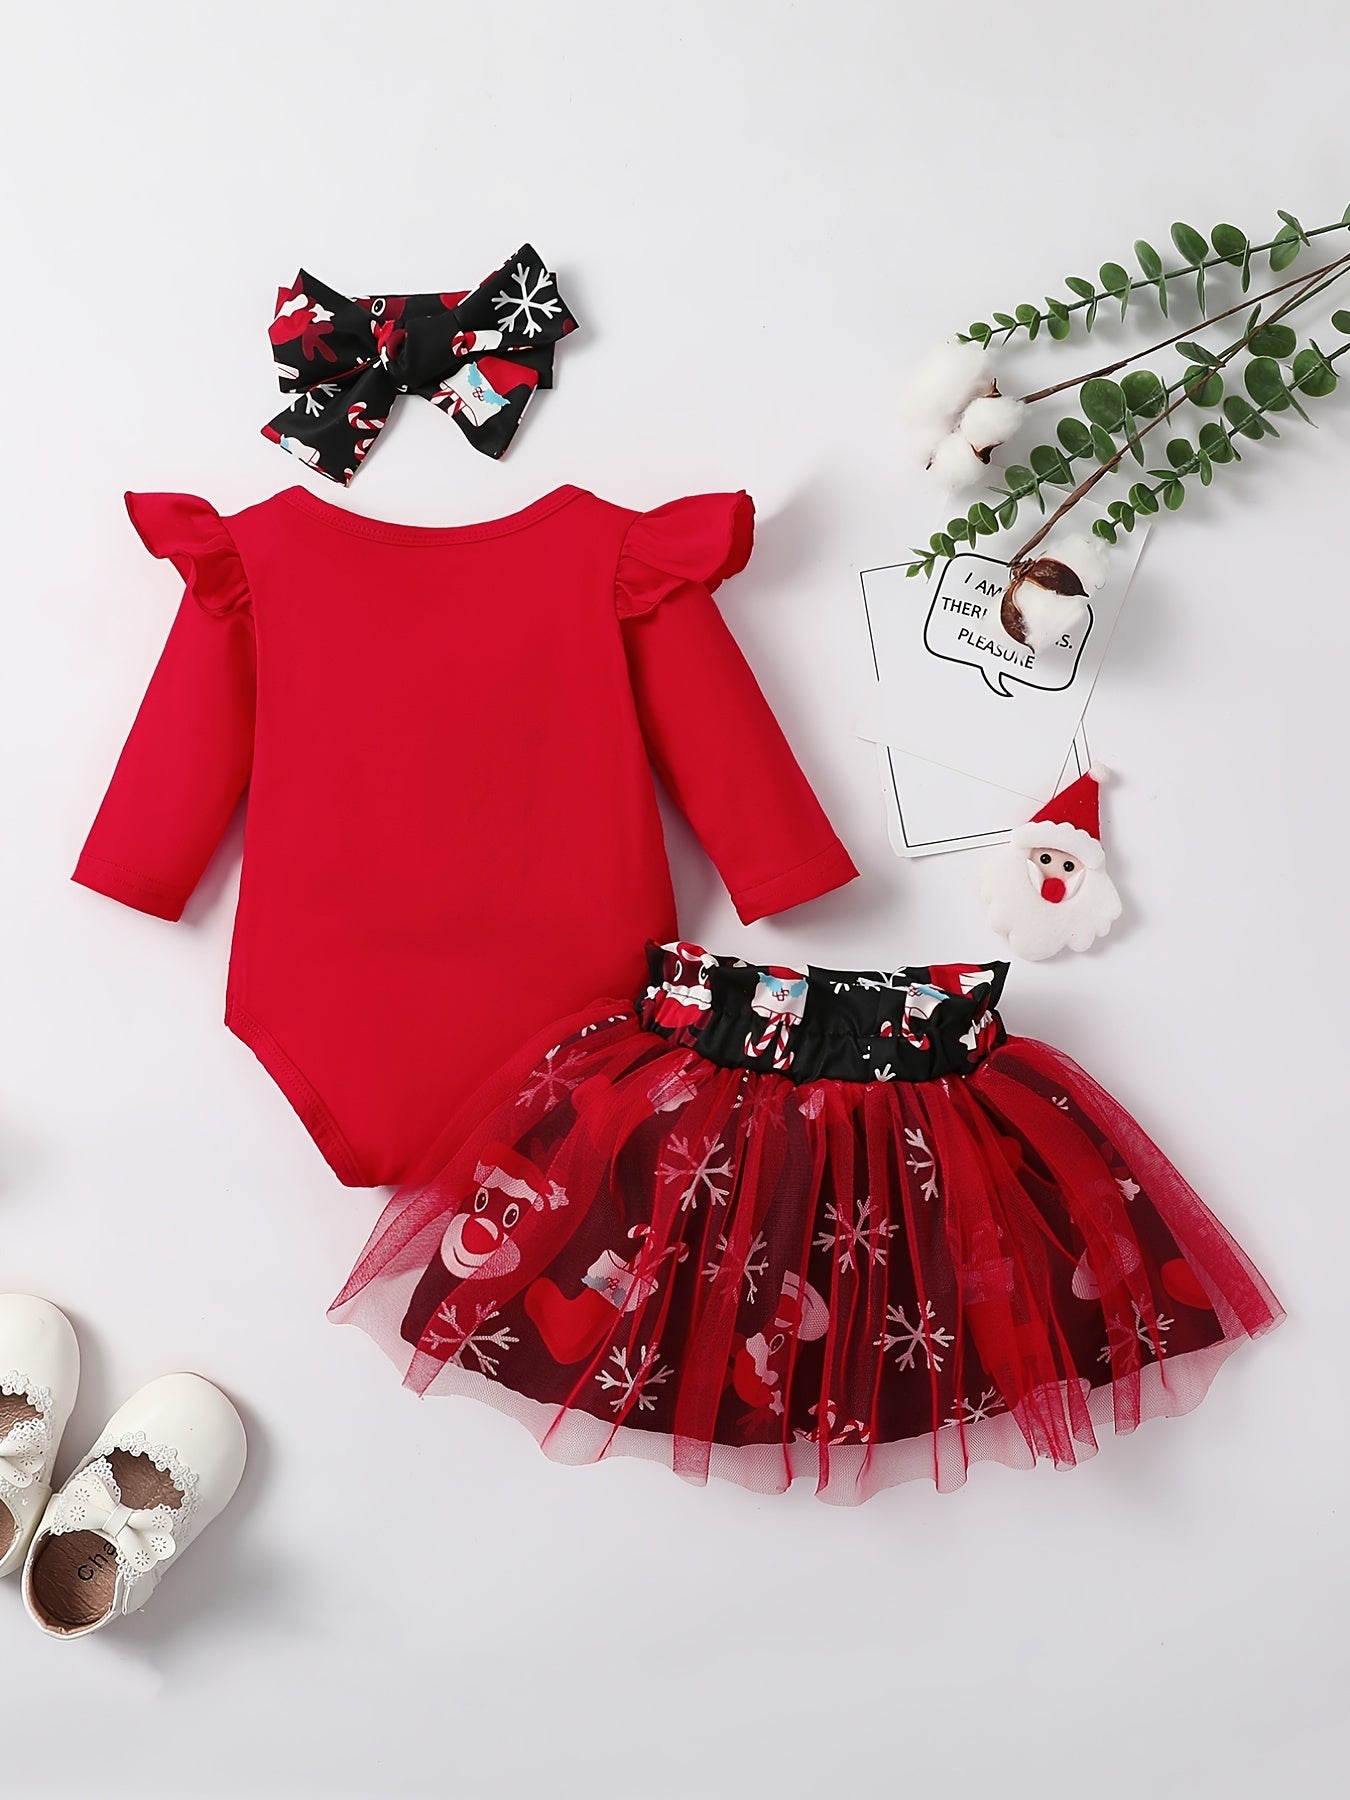 Baby Girls Adorable Christmas Outfit Infant Long Sleeve Romper & Snowman Print Tulle Dresses Set Festival Party Dress Up